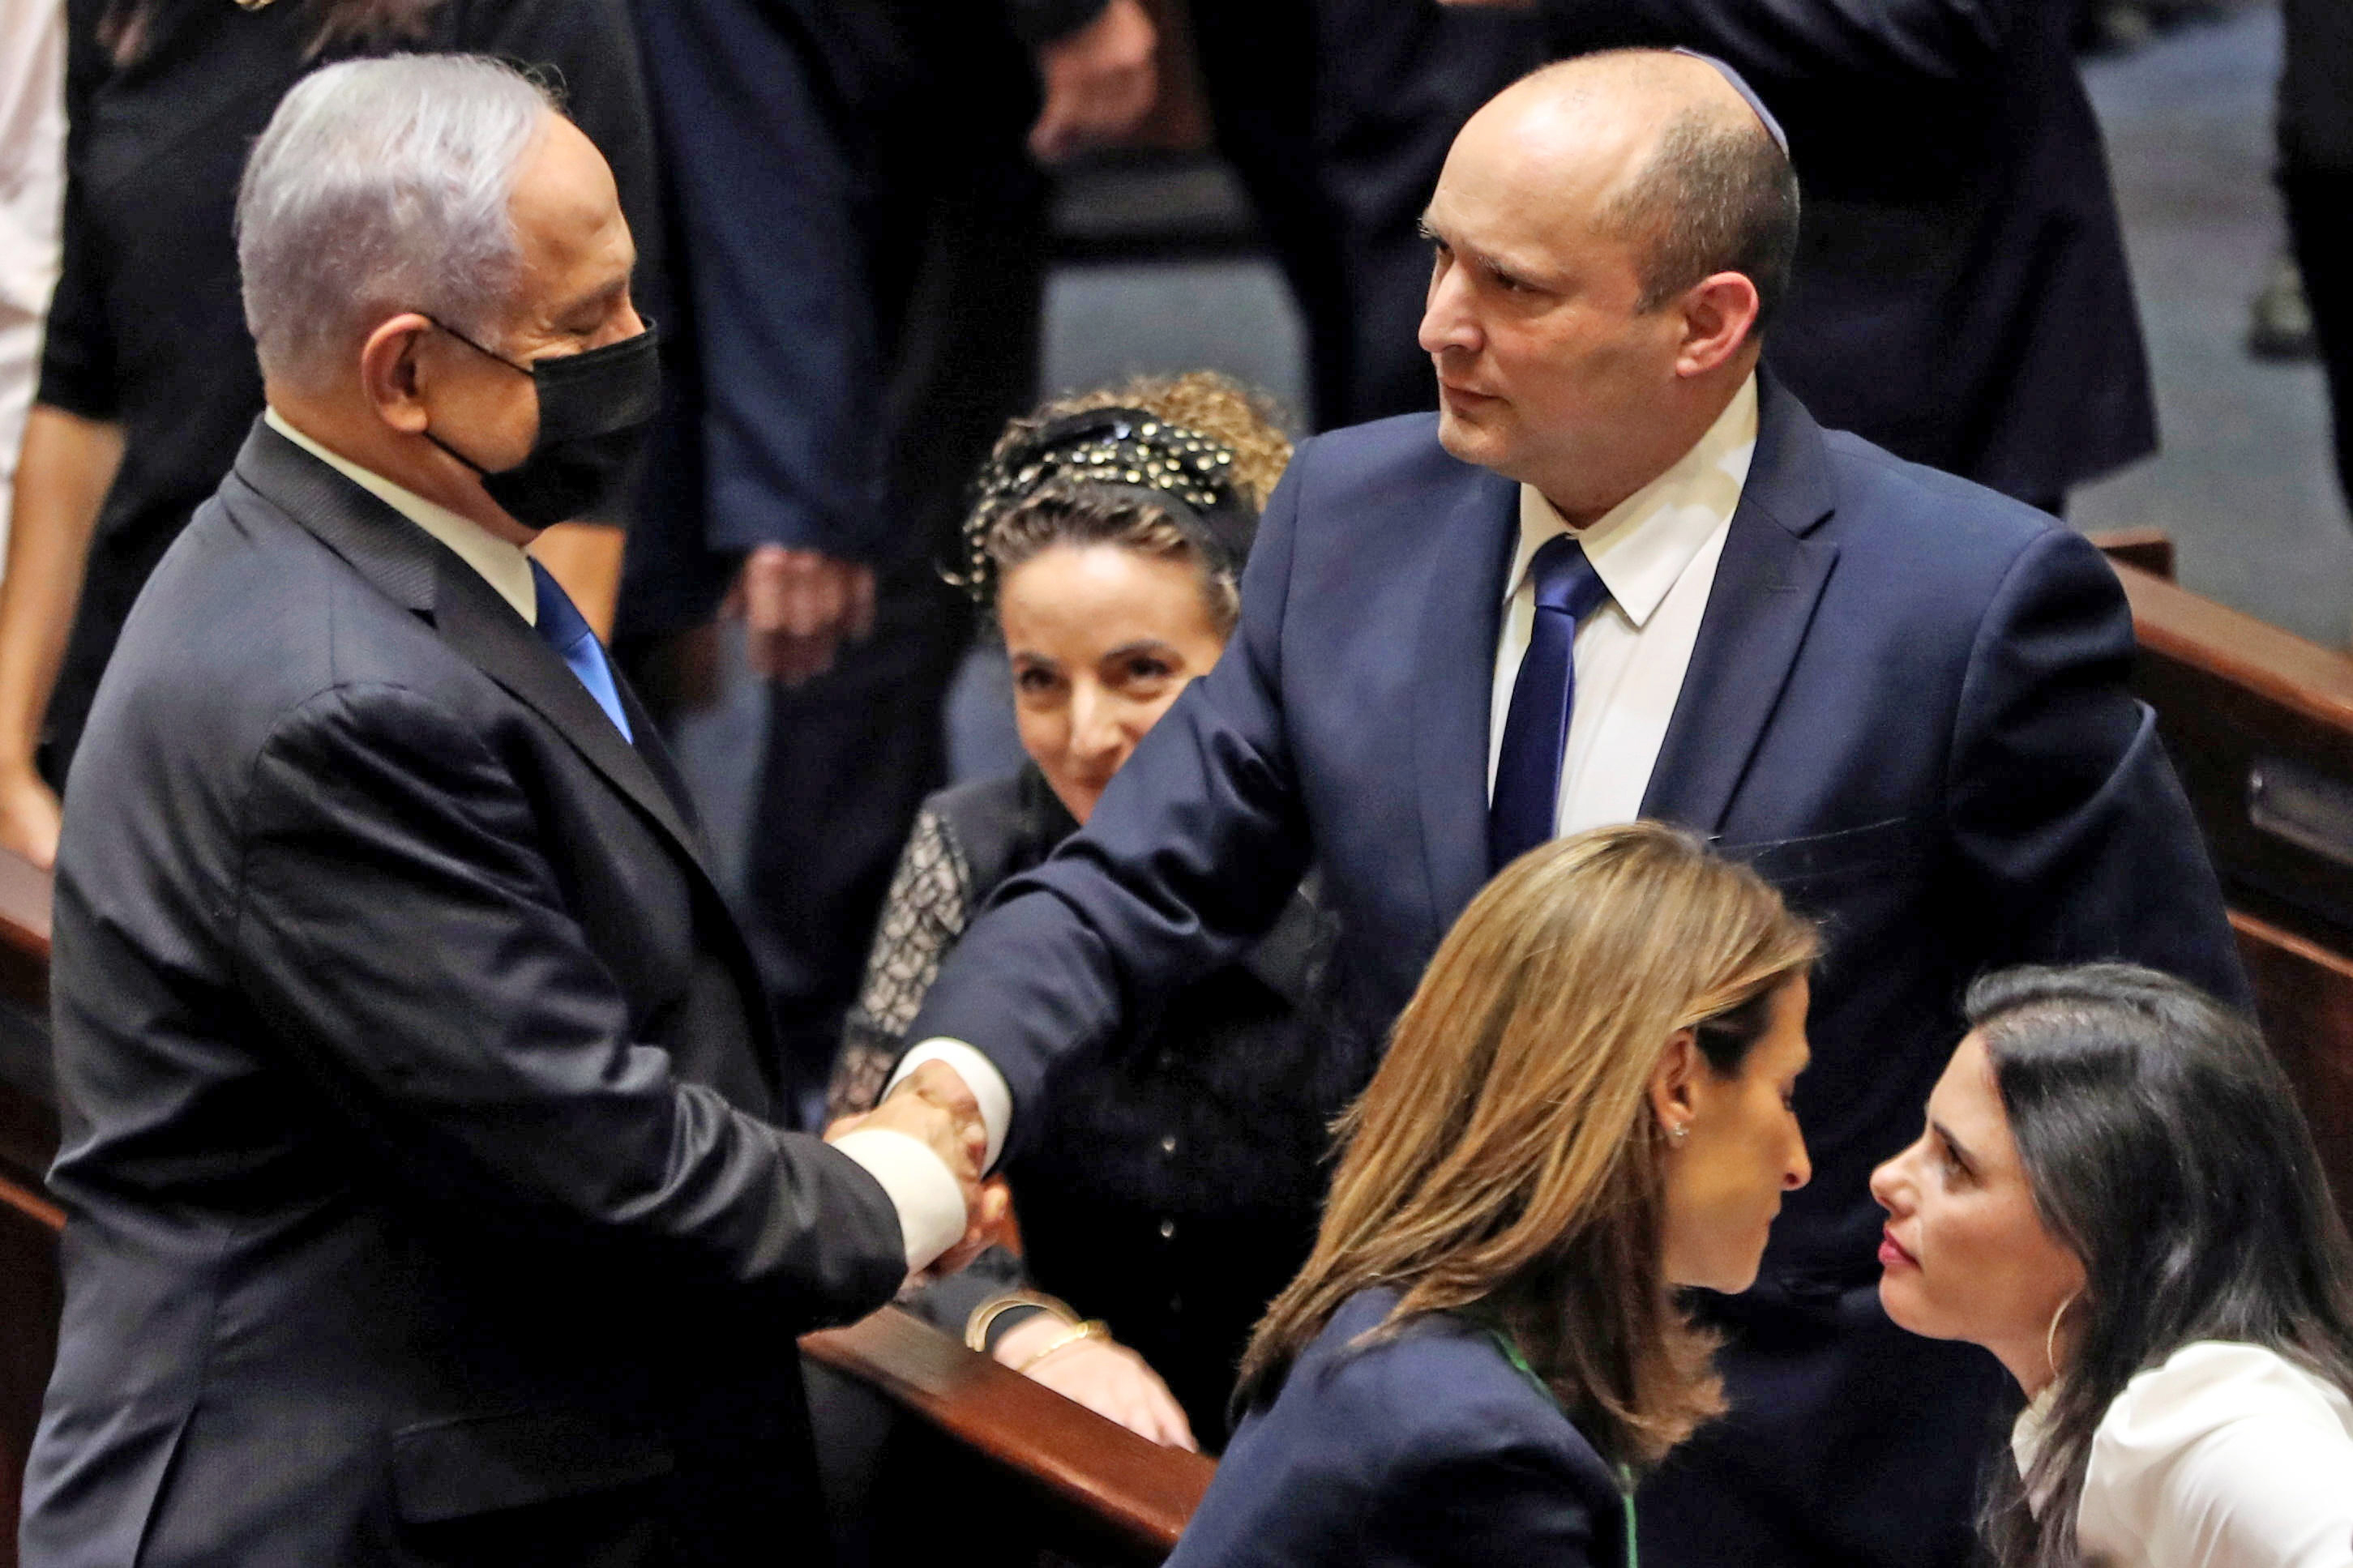 Incoming Prime Minister Naftali Bennett (right) shakes hands with Benjamin Netanyahu. Photo: Reuters